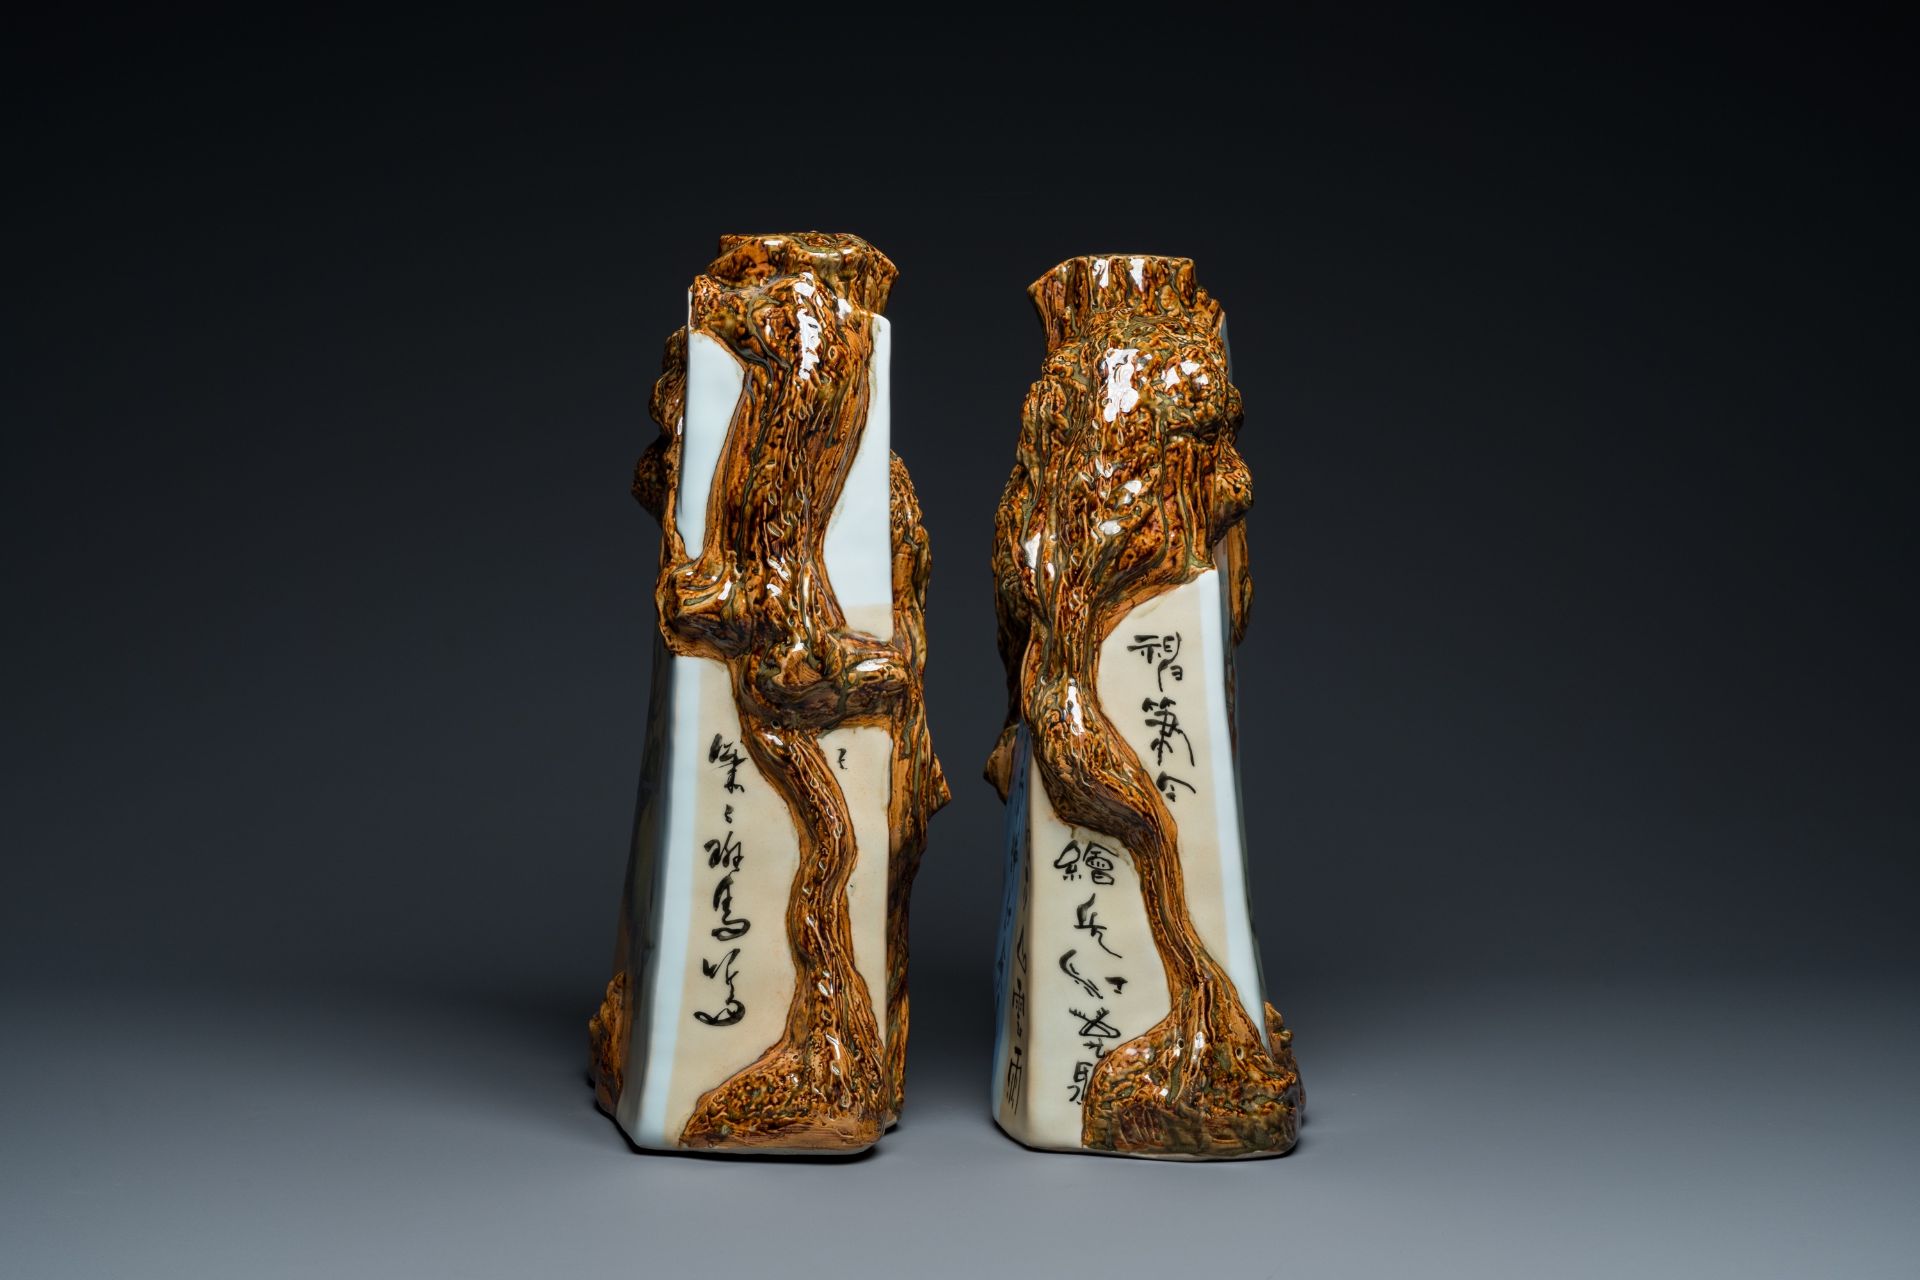 Two Chinese decorative faux bois ornaments, '1200 Years Jingdezheng', dated 2004 - Image 3 of 7